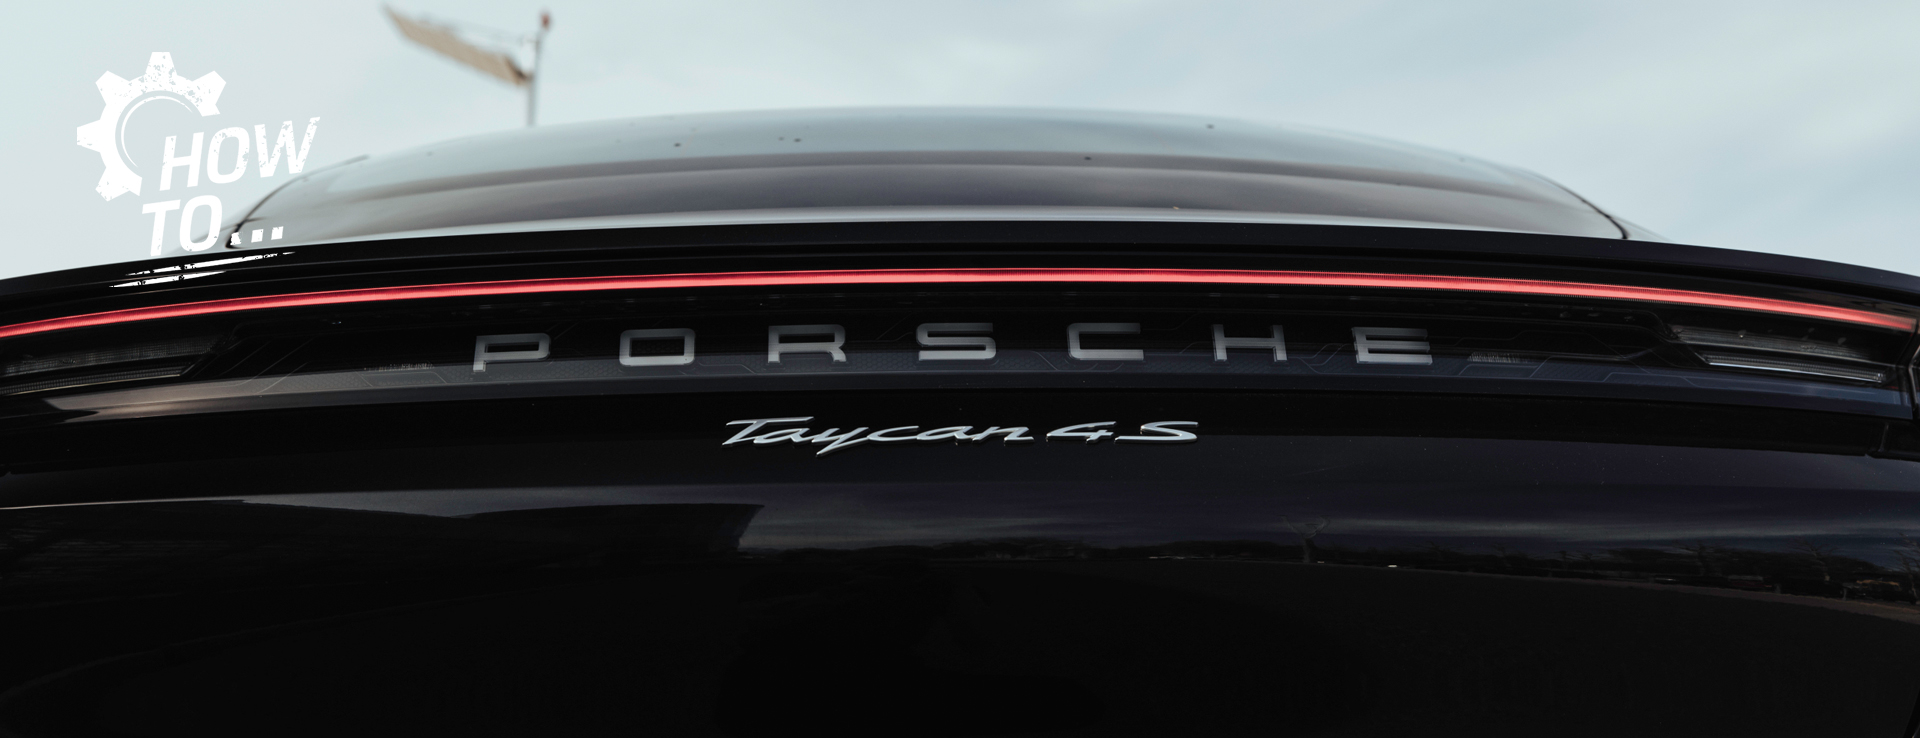 Close-up of rear of black Porsche Taycan 4S